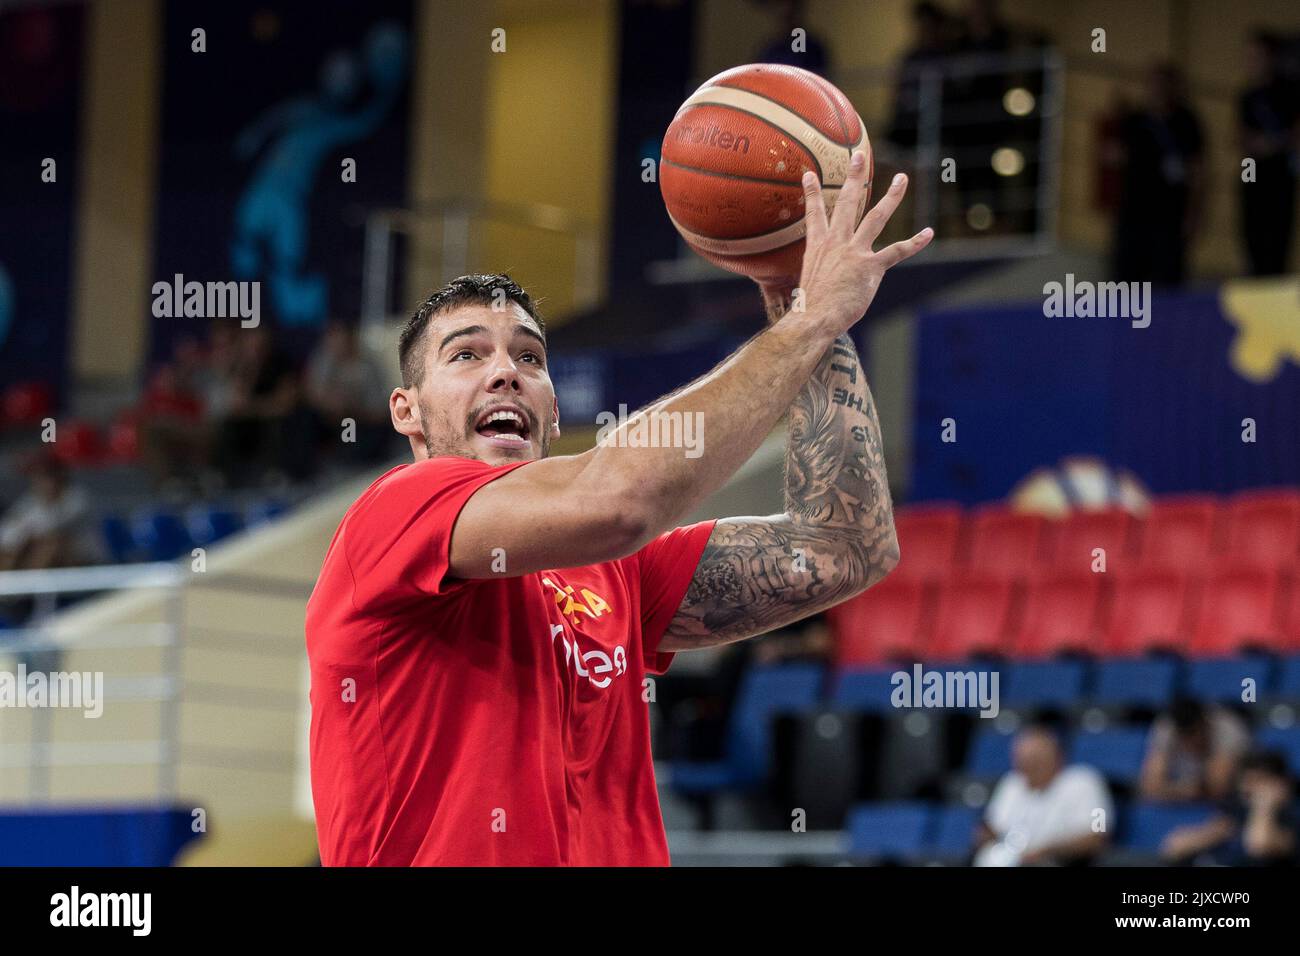 Tbilisi, Georgia, 6th September 2022. Willy Hernangomze of Spain warms up during the FIBA EuroBasket 2022 group A match between Montenegro and Spain at Tbilisi Arena in Tbilisi, Georgia. September 6, 2022. Credit: Nikola Krstic/Alamy Stock Photo